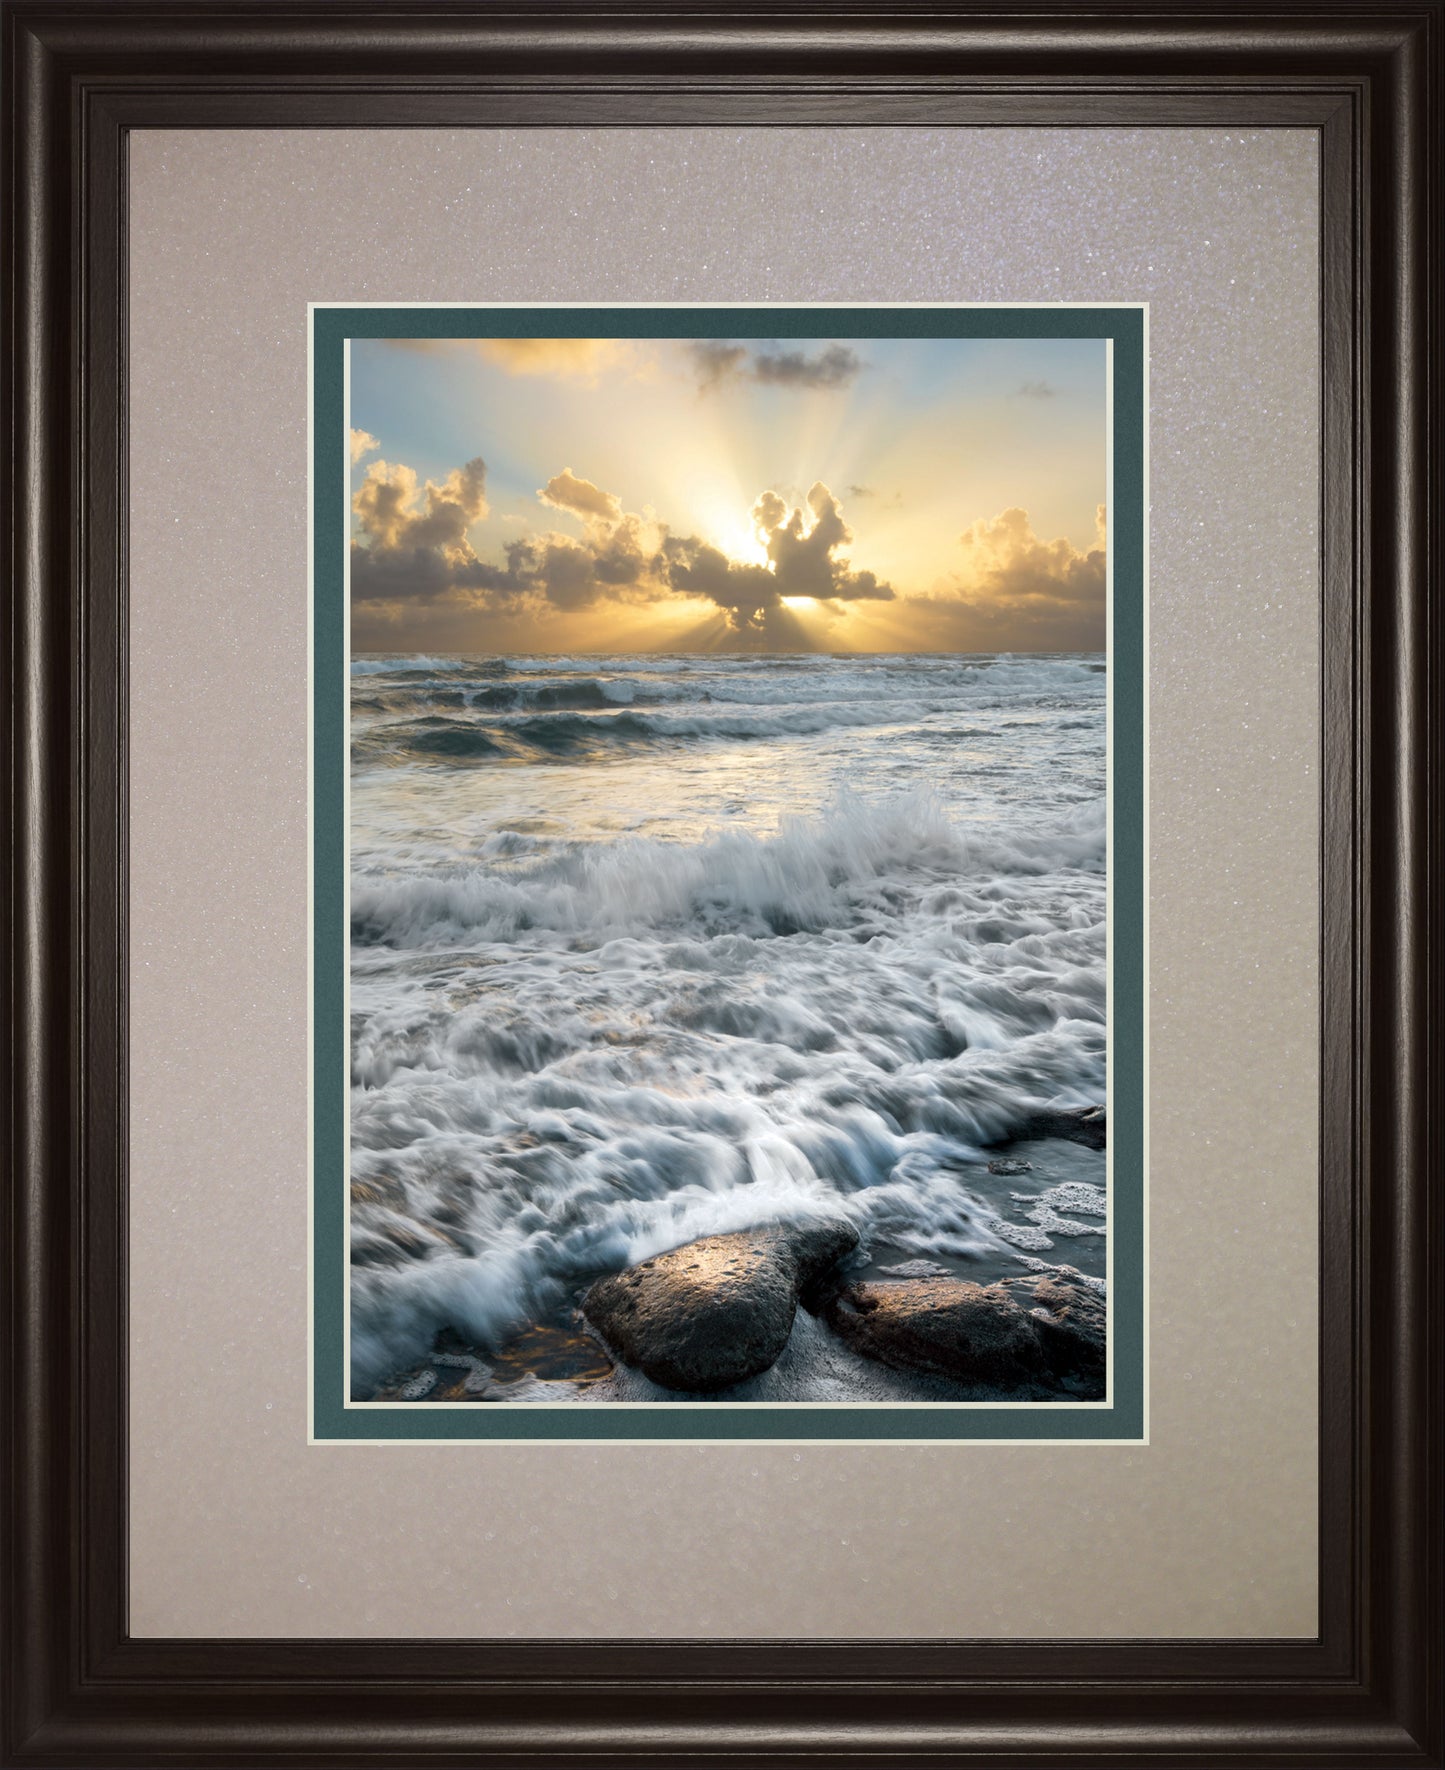 Crash By Celebrate Life Gallery - Framed Print Wall Art - Gold